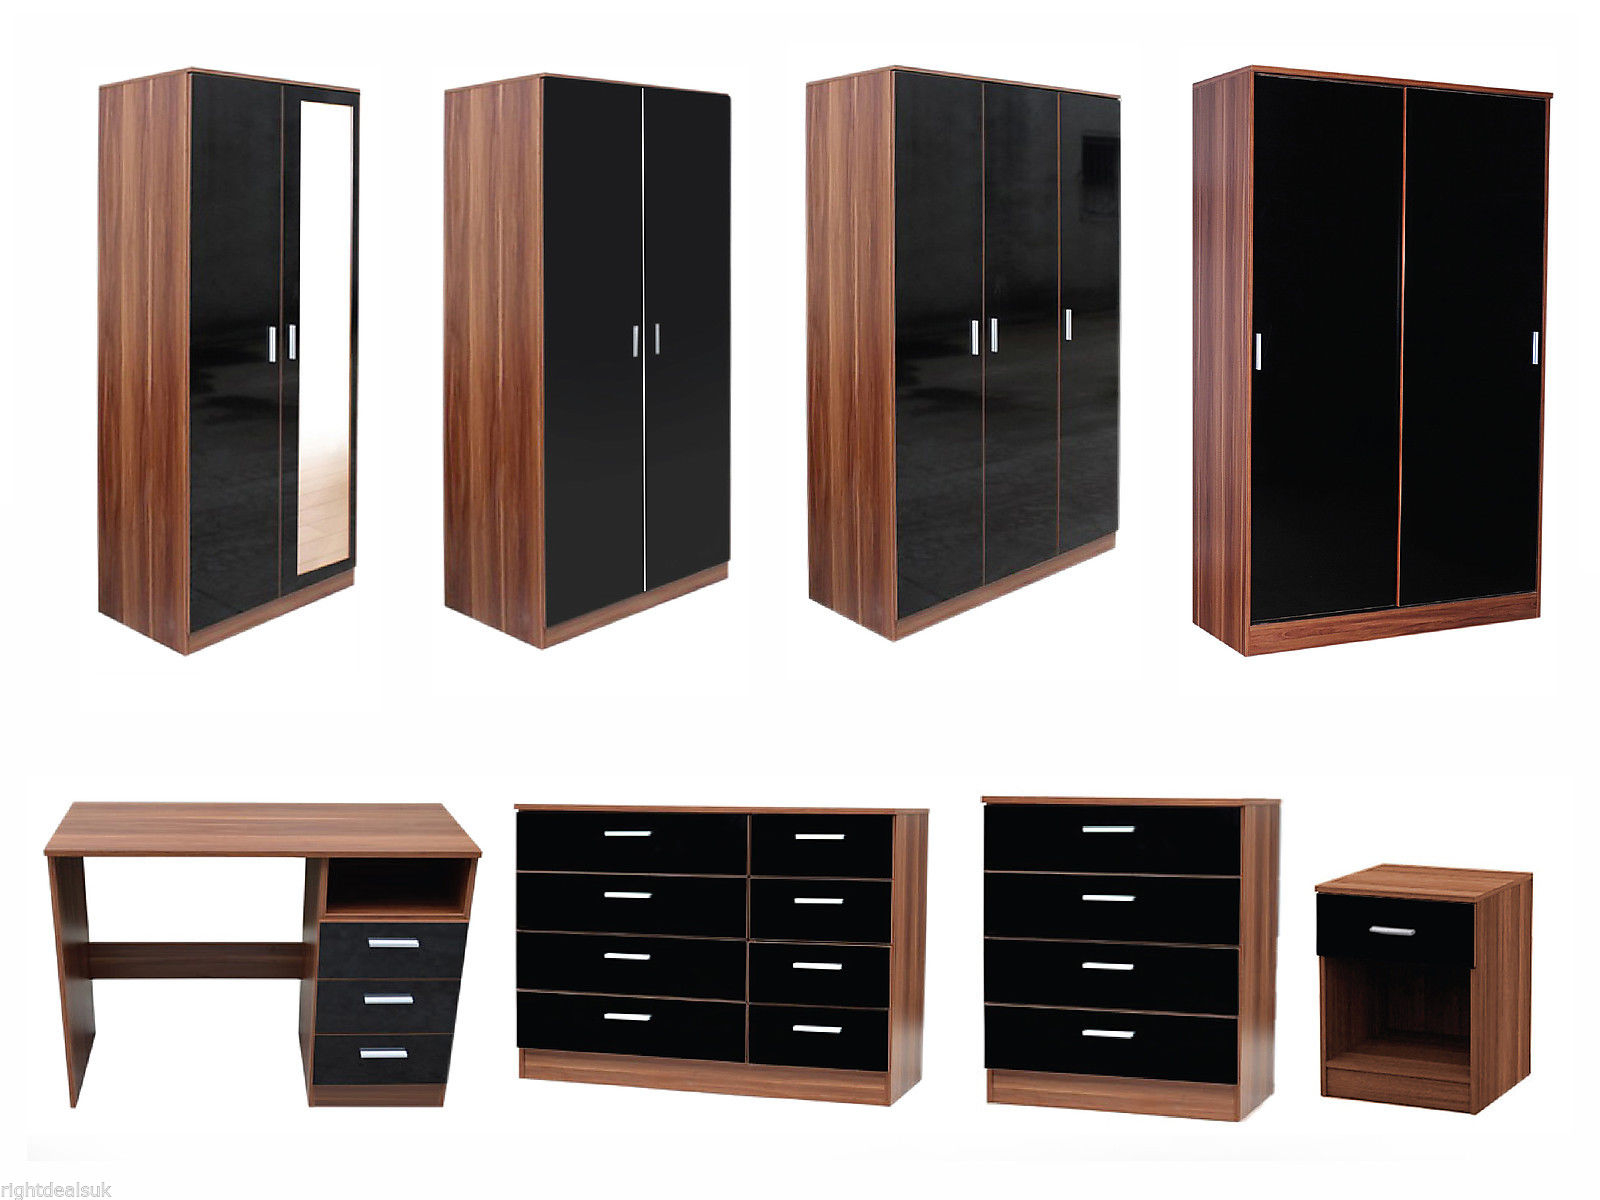 Details About New Caspian High Gloss Black Walnut Bedroom Furniture Set Full Supreme Range with regard to sizing 1600 X 1200